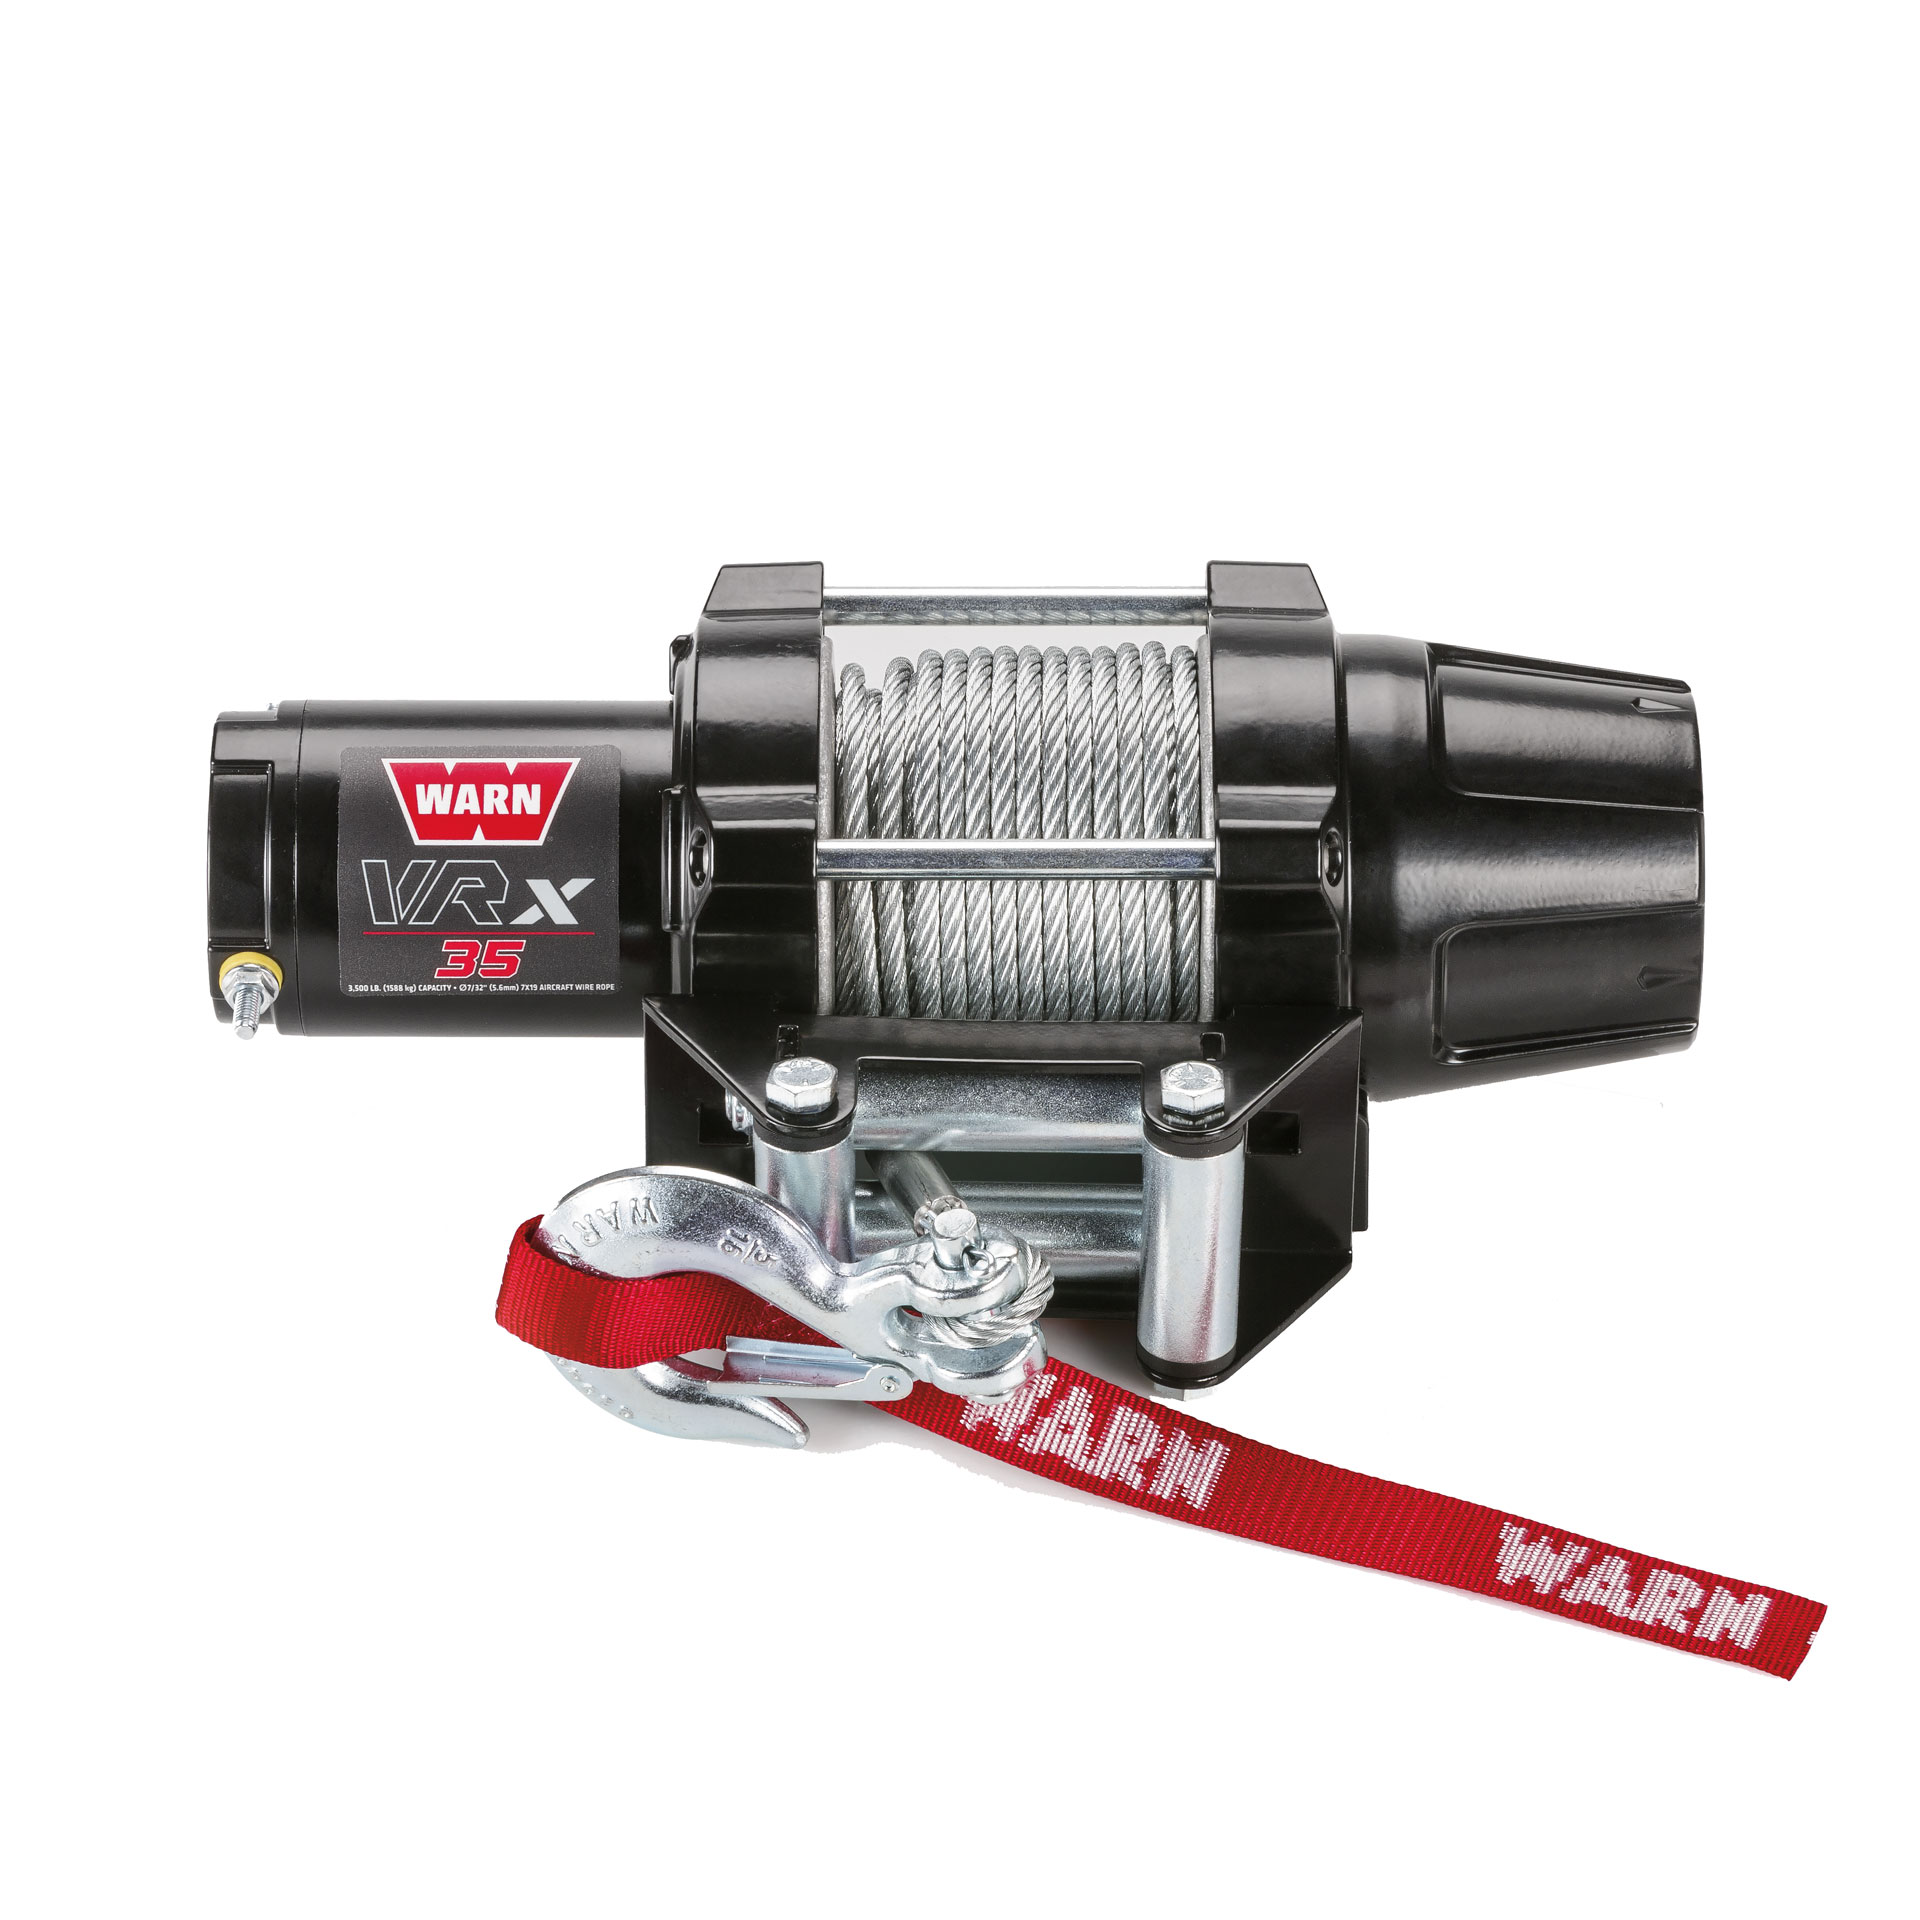 WARN® VRX 3500 Winch with Wire Rope